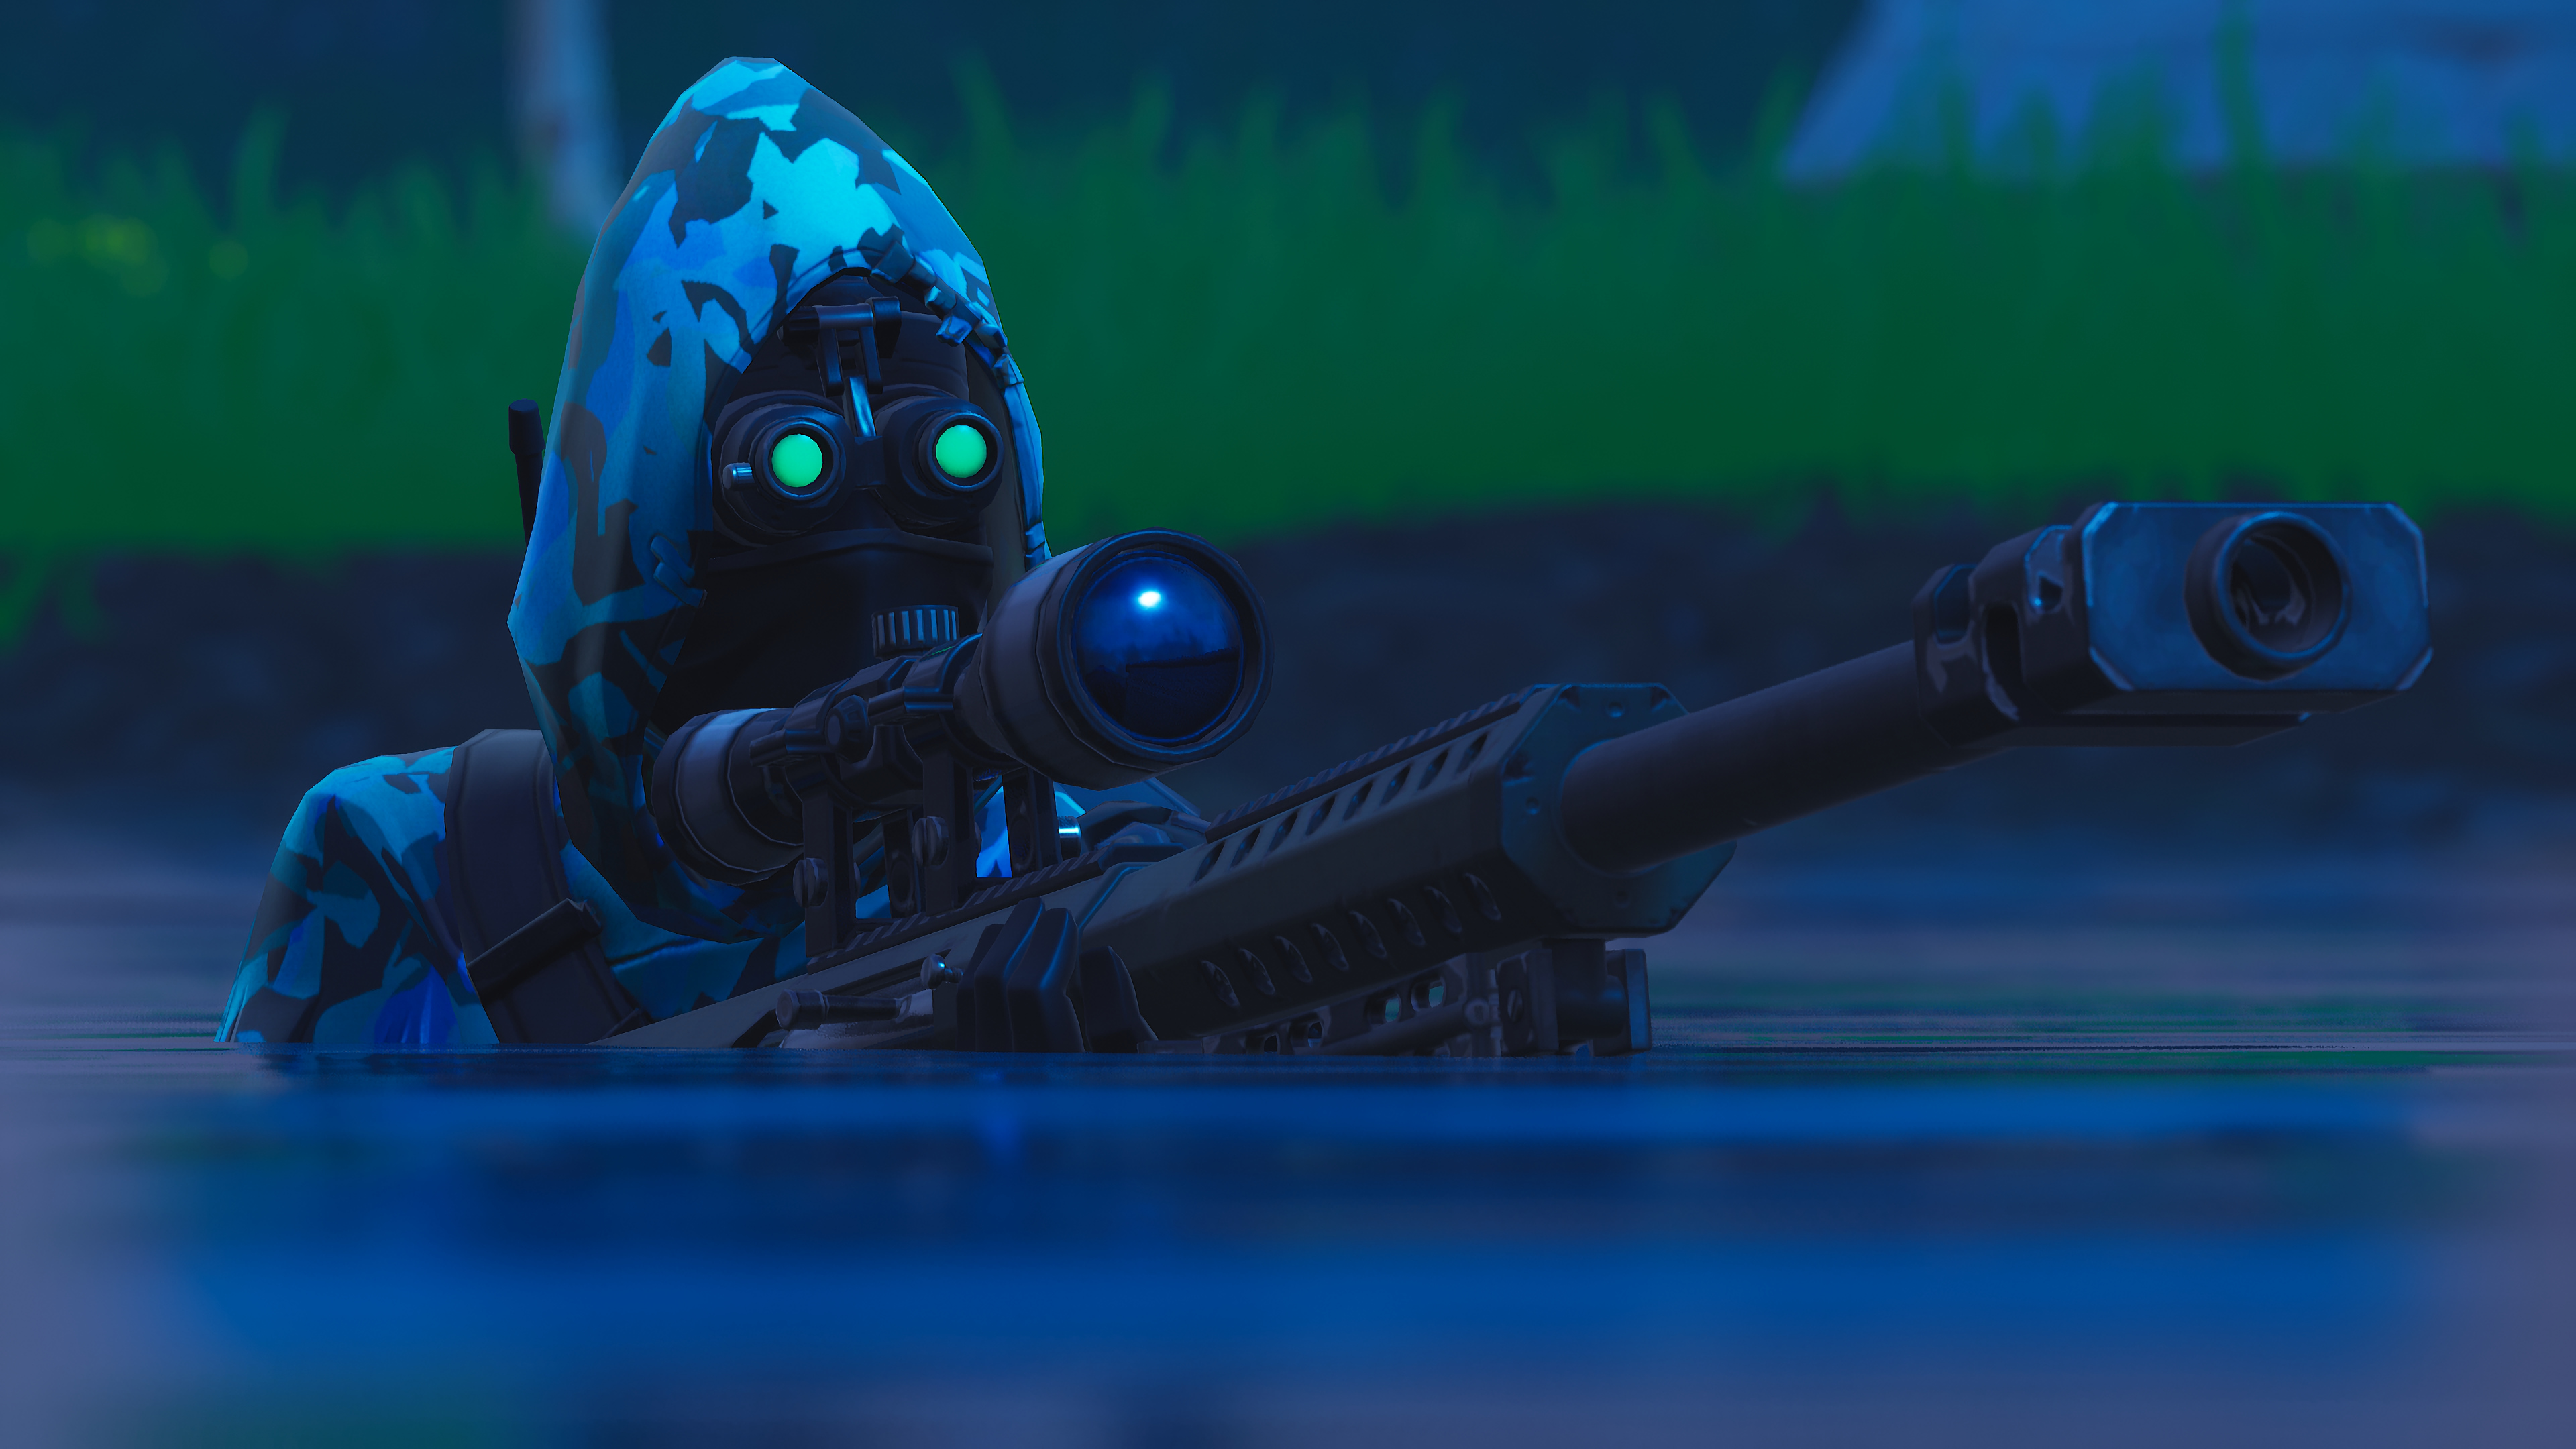 Wallpaper Fortnite Insight with Sniper Rifle